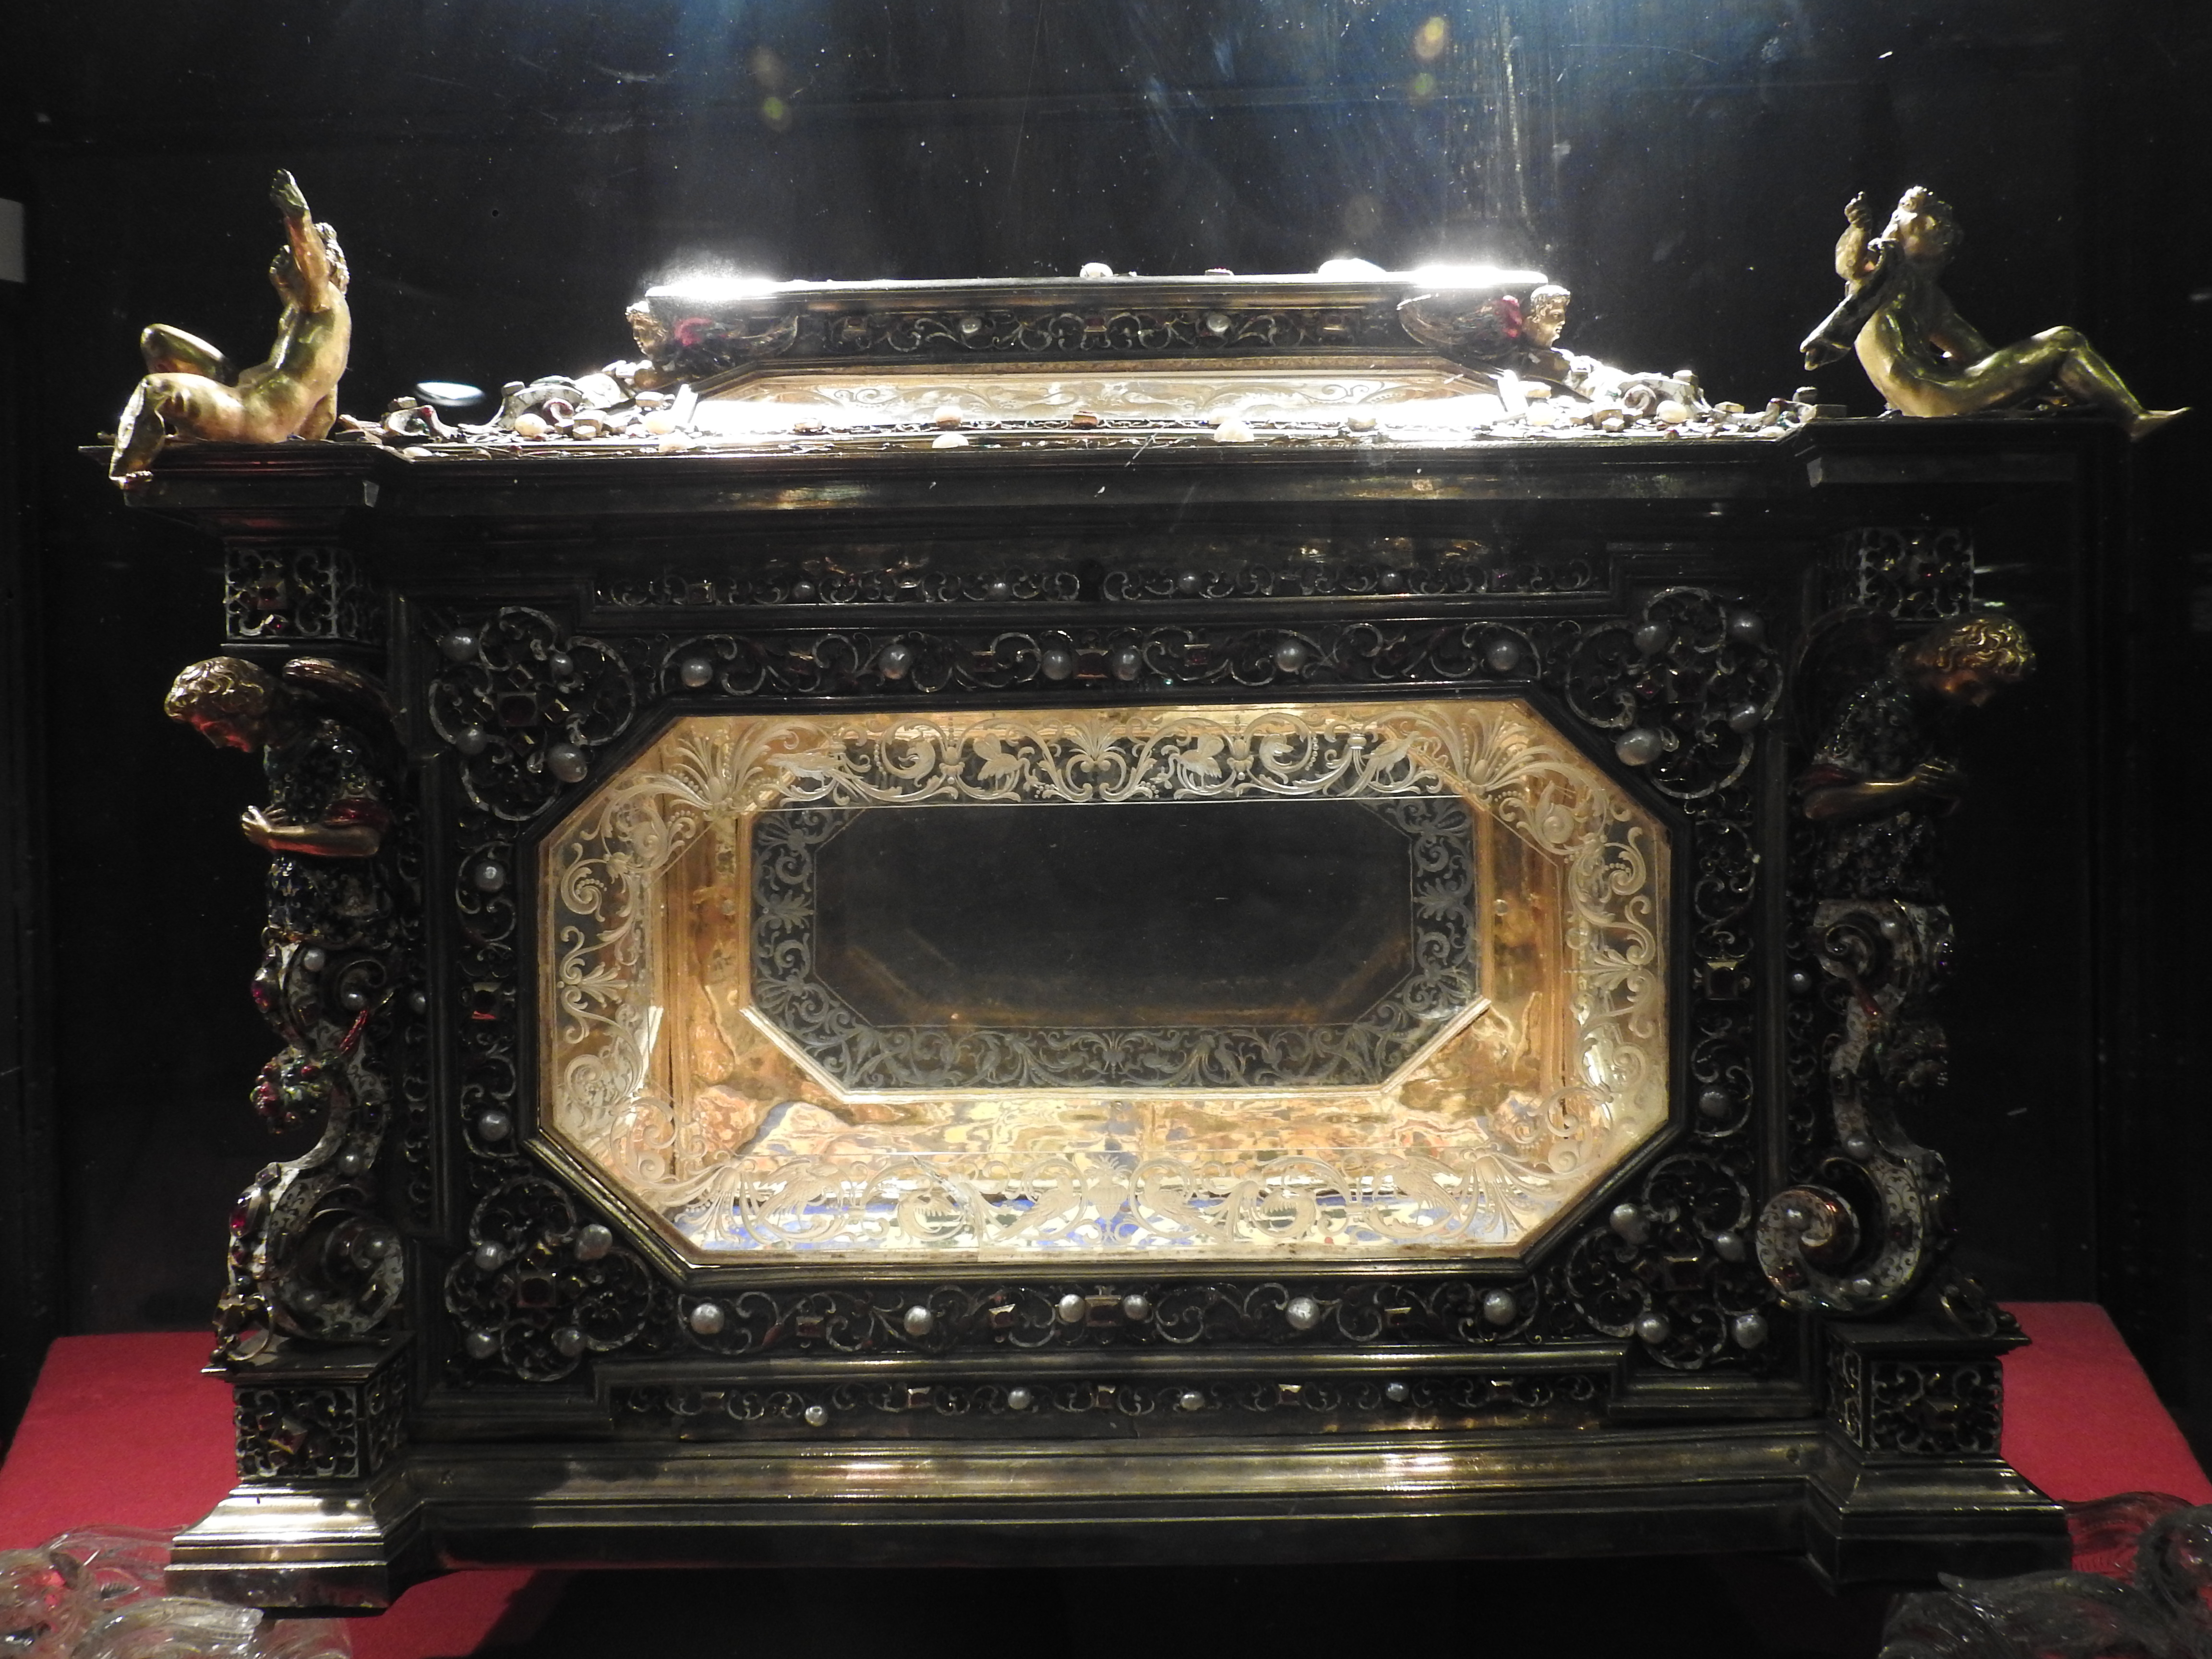 Cabinet of the ashes of St. John the Baptist